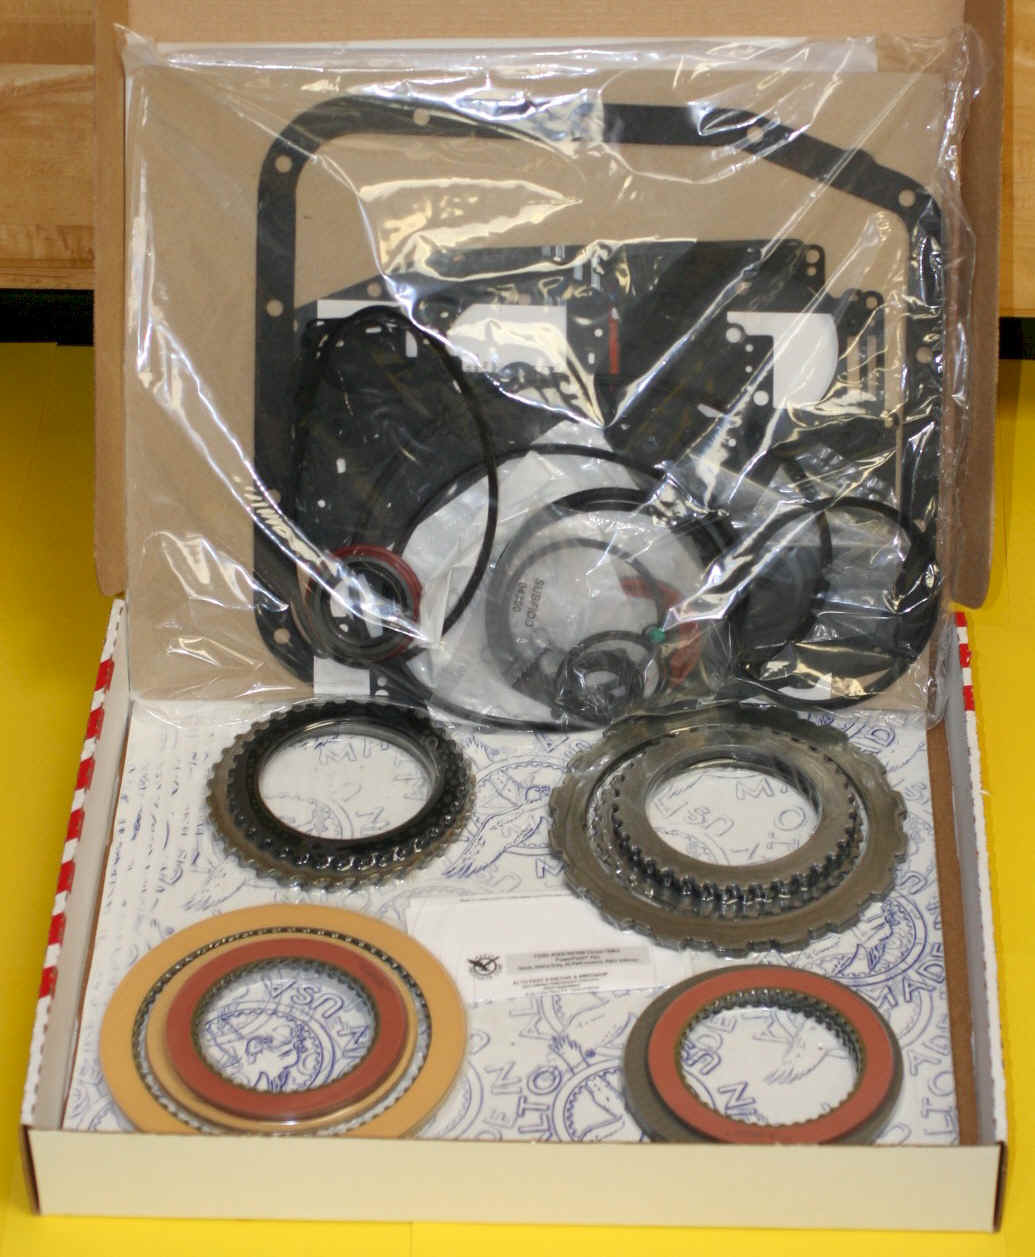 AODE 4R70W Overhaul Rebuild Kit w/fric  2003 to Present